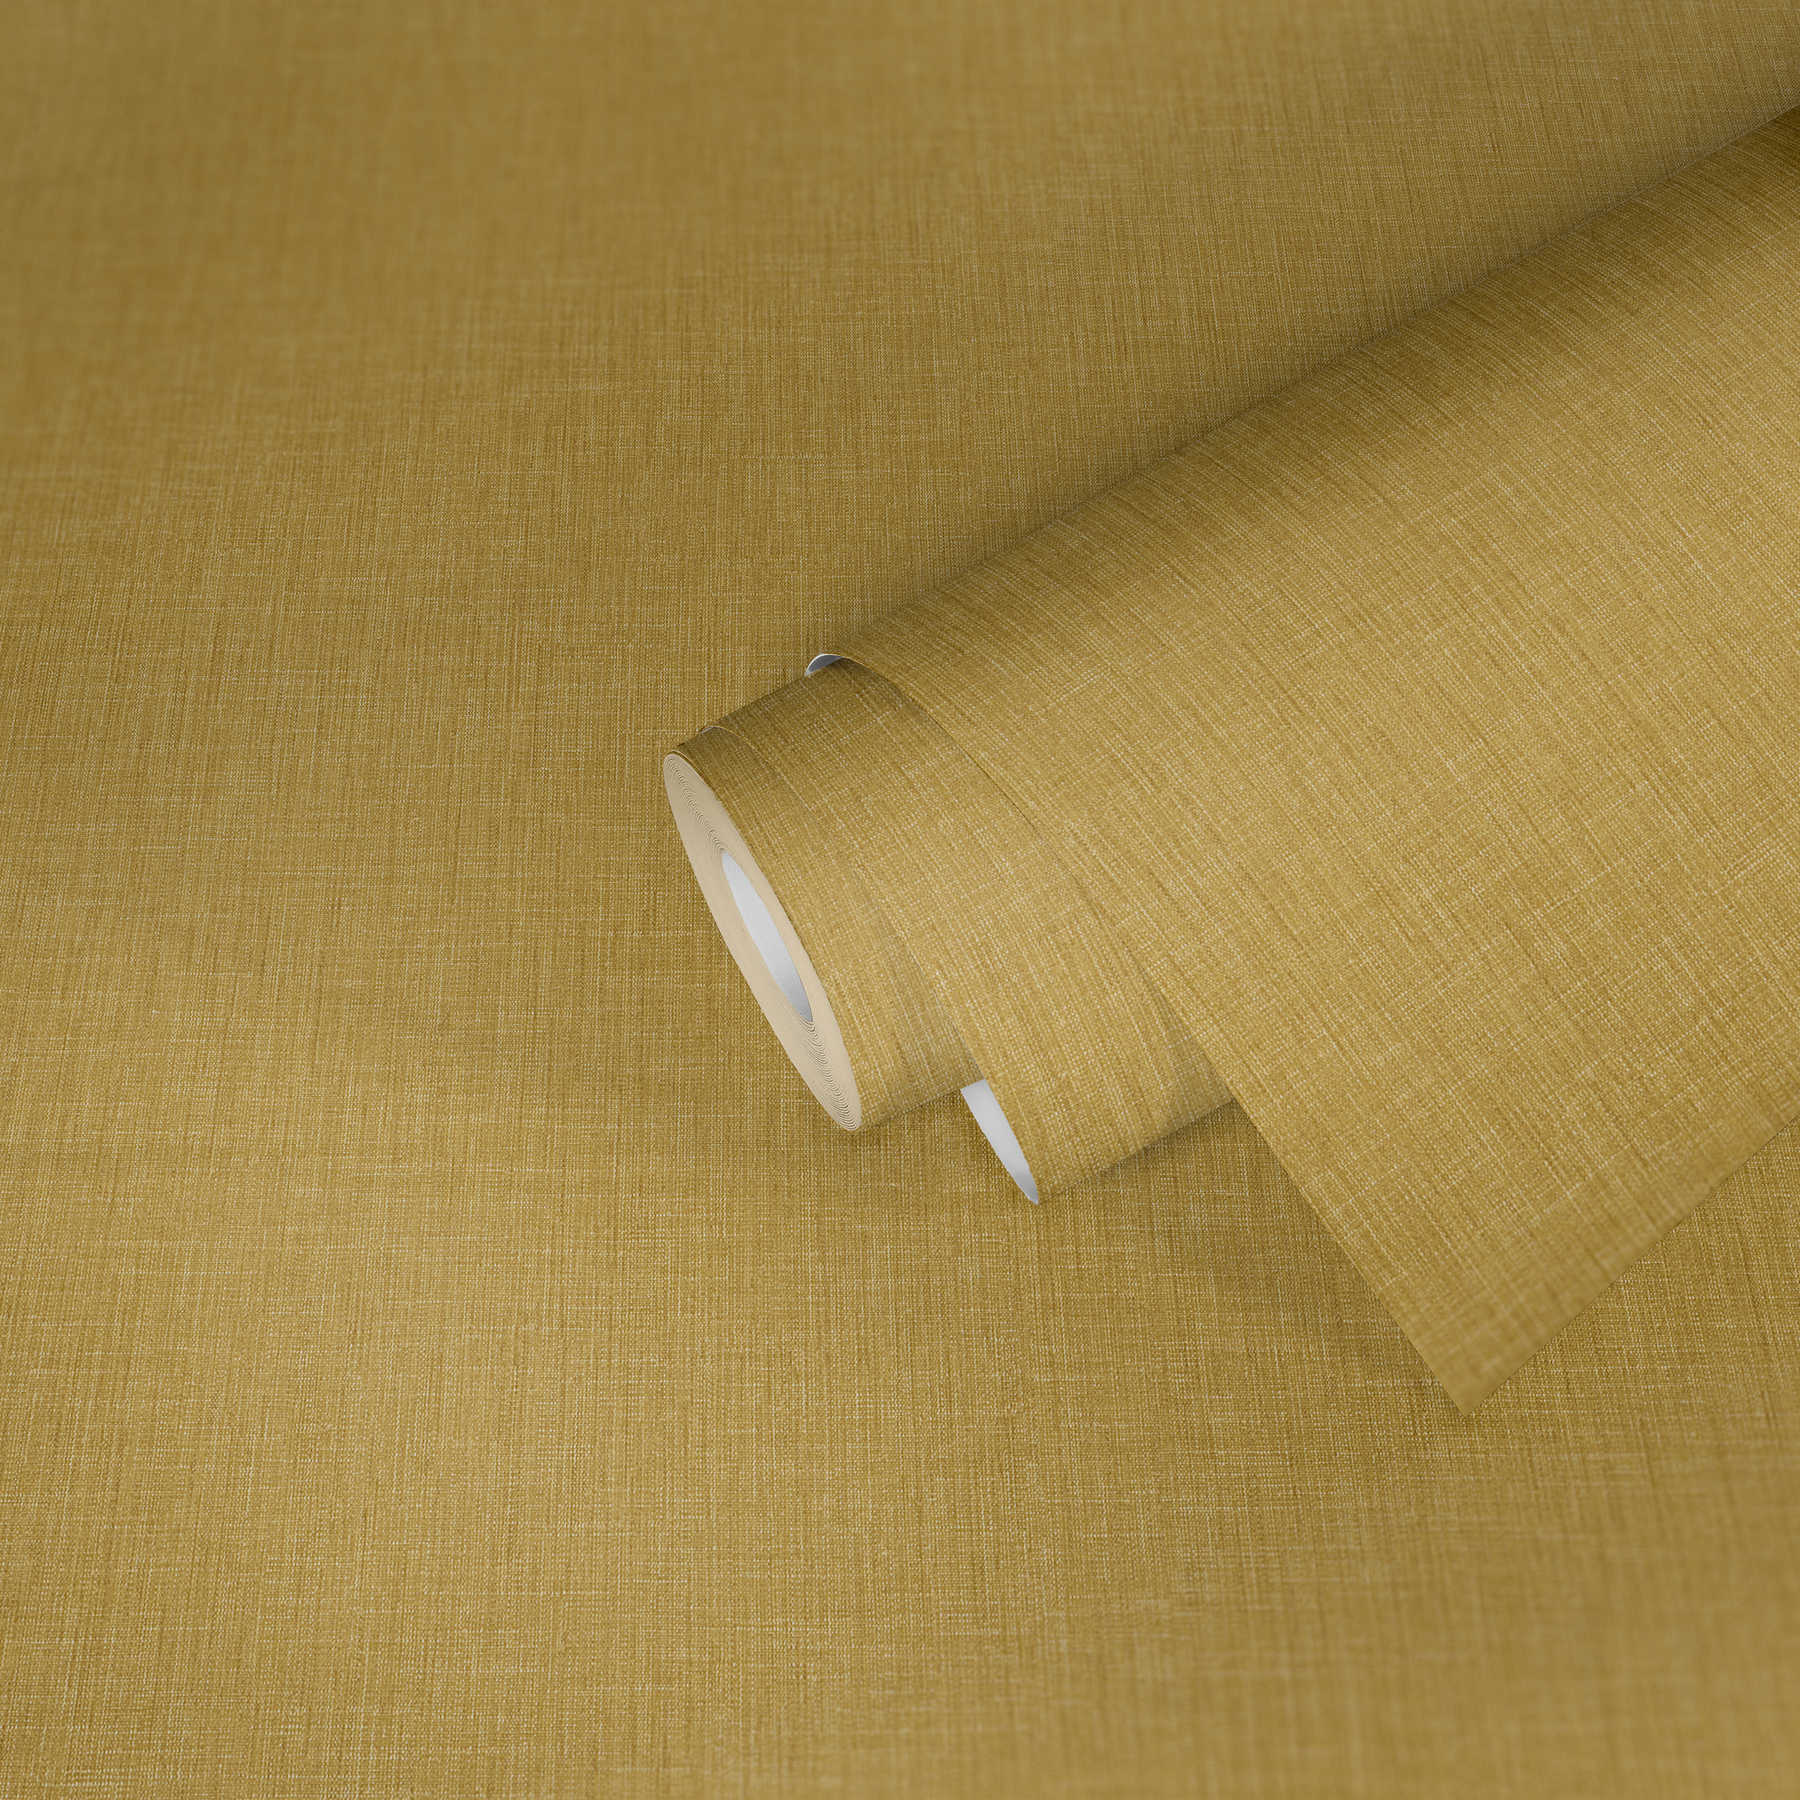             Plain wallpaper with textile structure - yellow
        